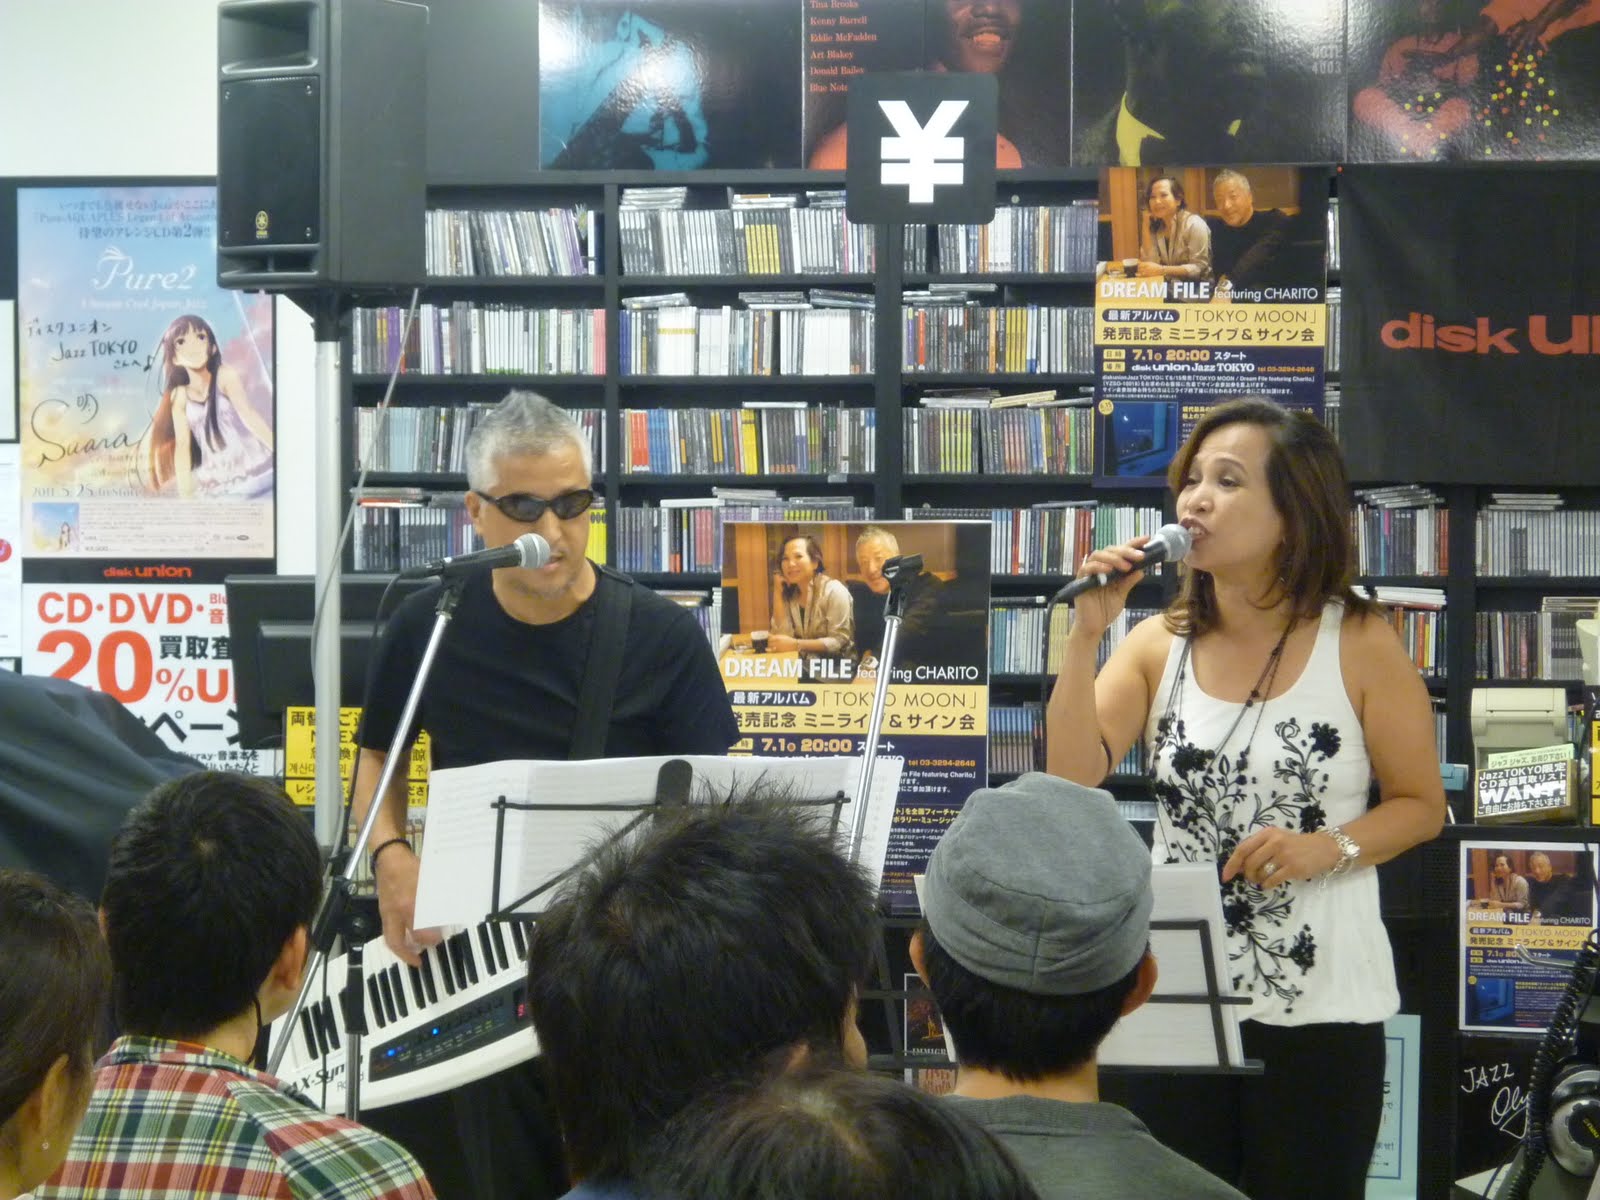 Charito S Music Travels Tokyo Moon In Store Live Cd Signing At Disk Union Jazz Tokyo 7 1 11